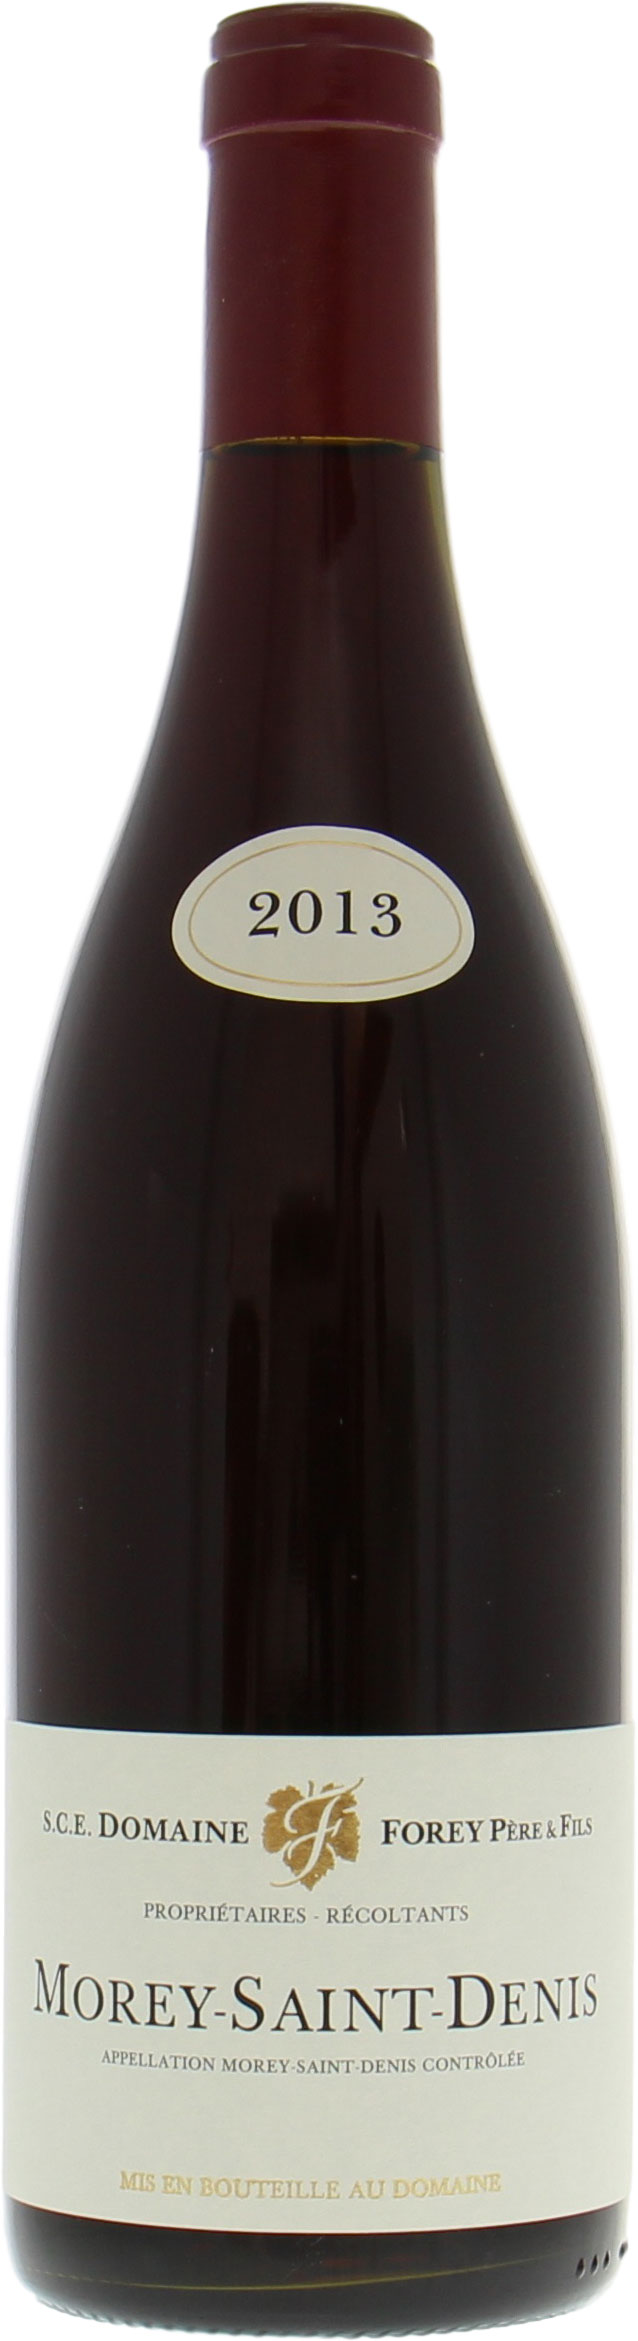 Domaine Forey Pere & Fils - Morey St. Denis 2013 Perfect